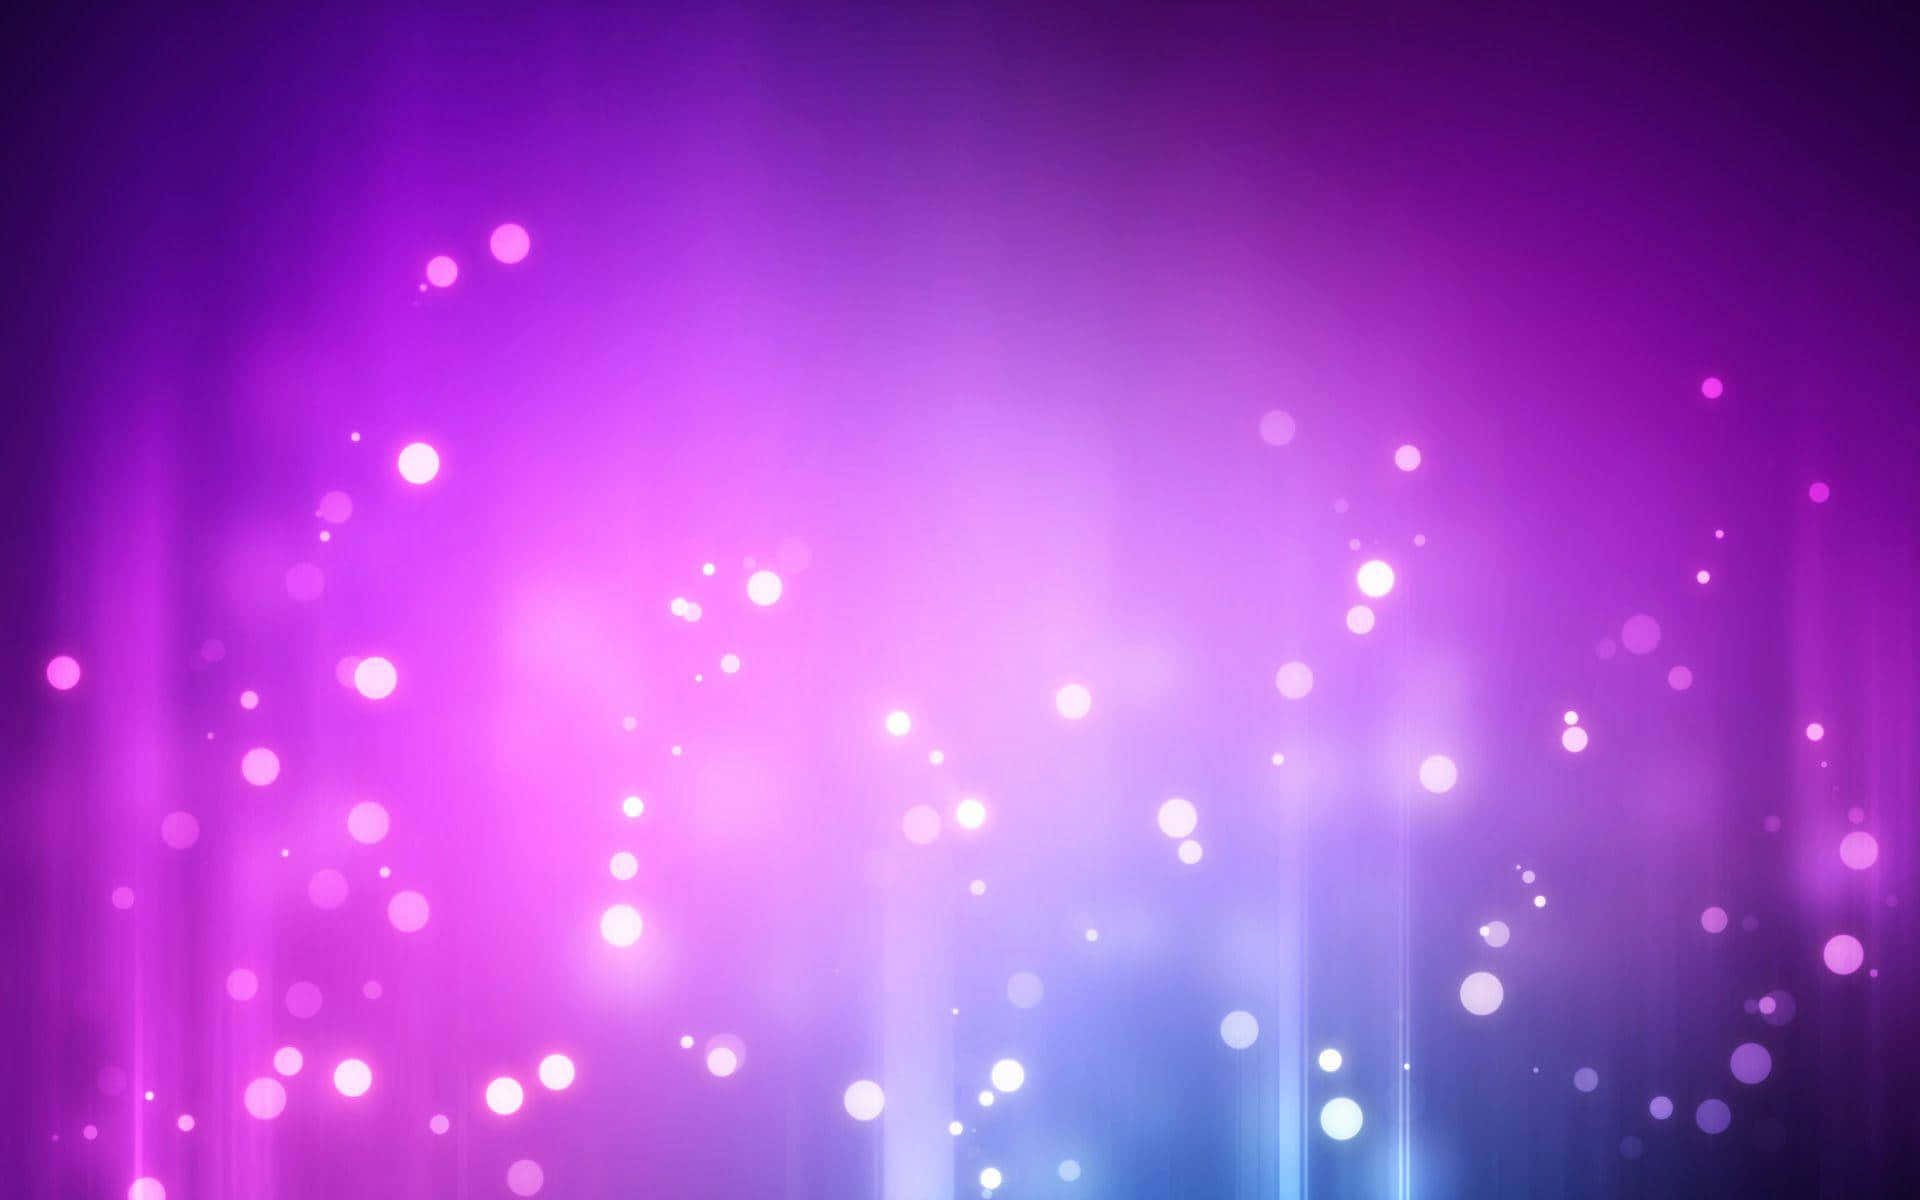 Enjoy the sight of a mesmerizing purple and pink abstract background